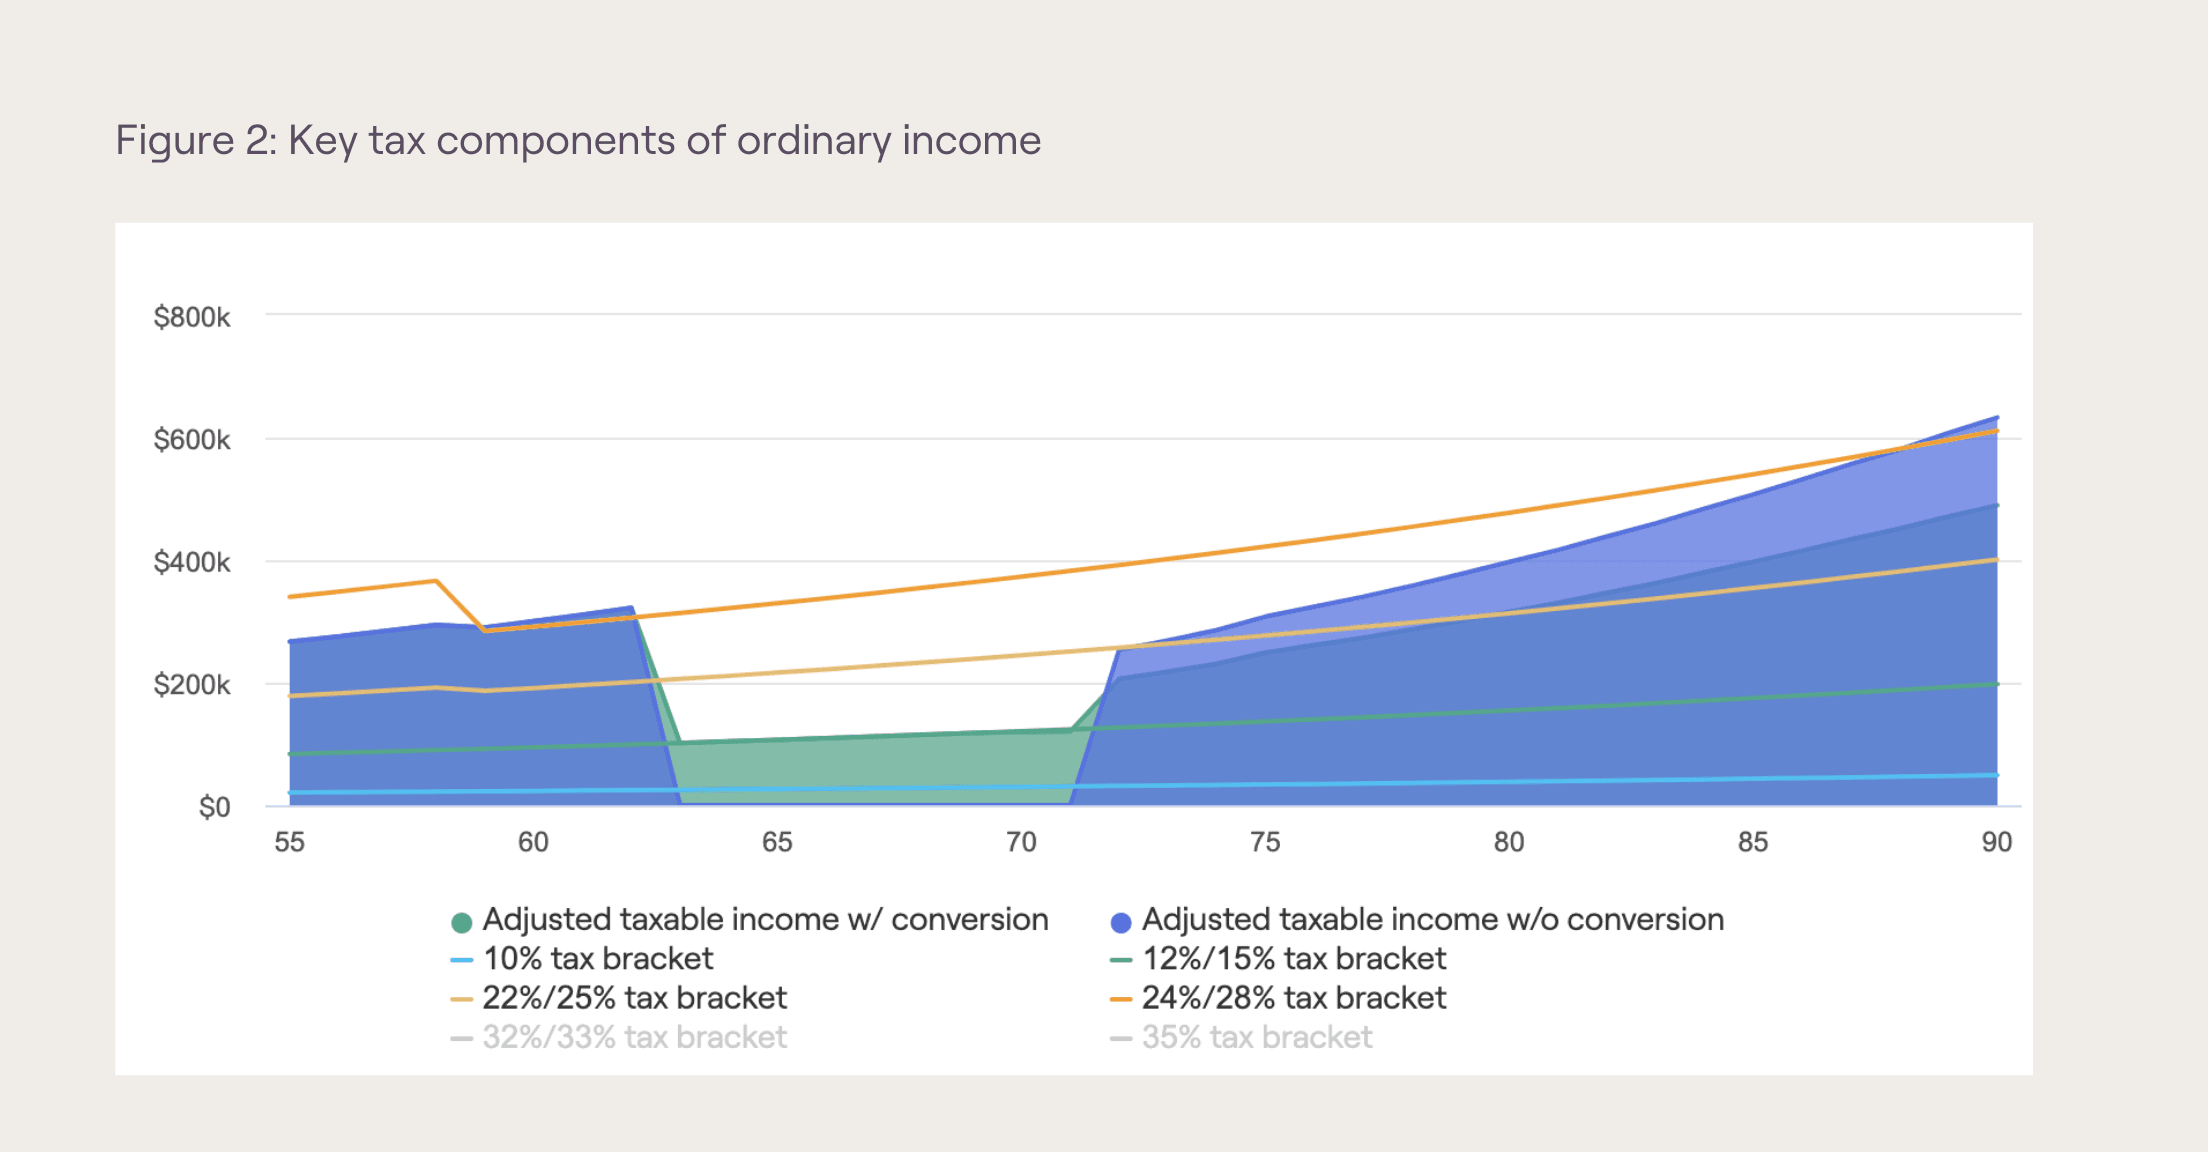 RightCapital screenshot showing key tax components of ordinary income